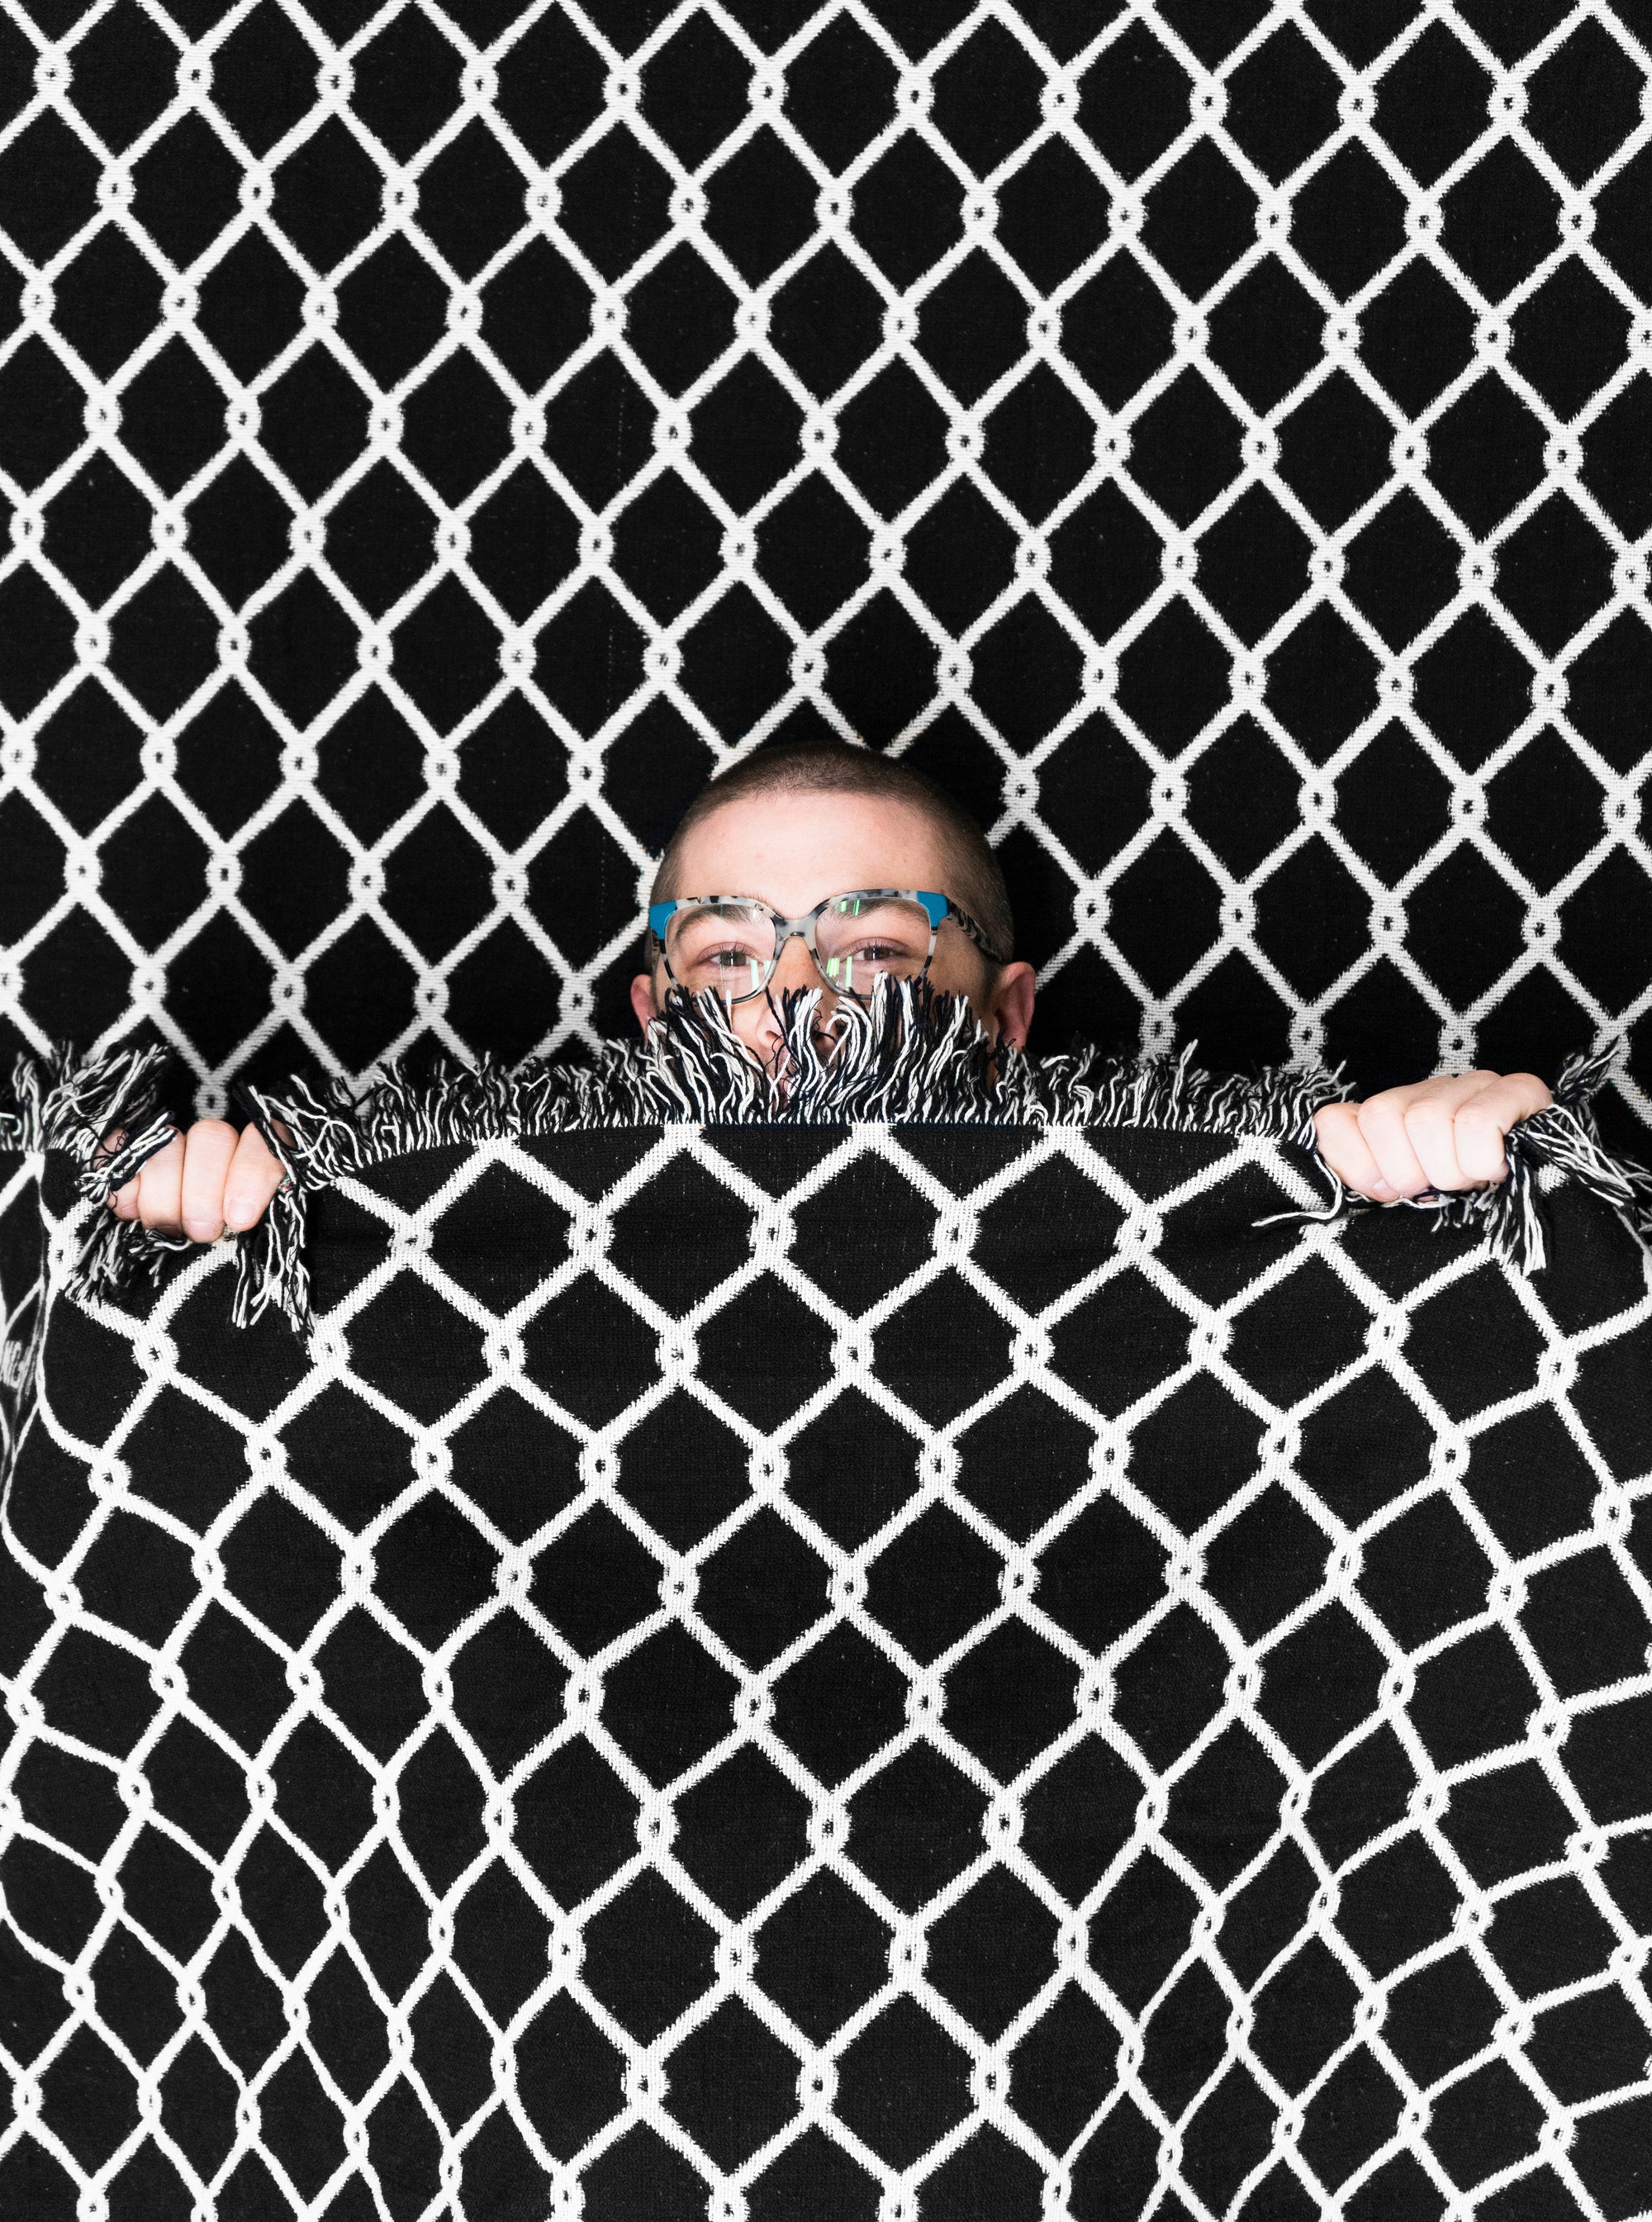 A person underneath the "Chainlink" woven blanket by No Fun®.  The person is peaking over the top of the blanket to showcase the scale of the design.  Only the top half of their face, and hands, are visible.